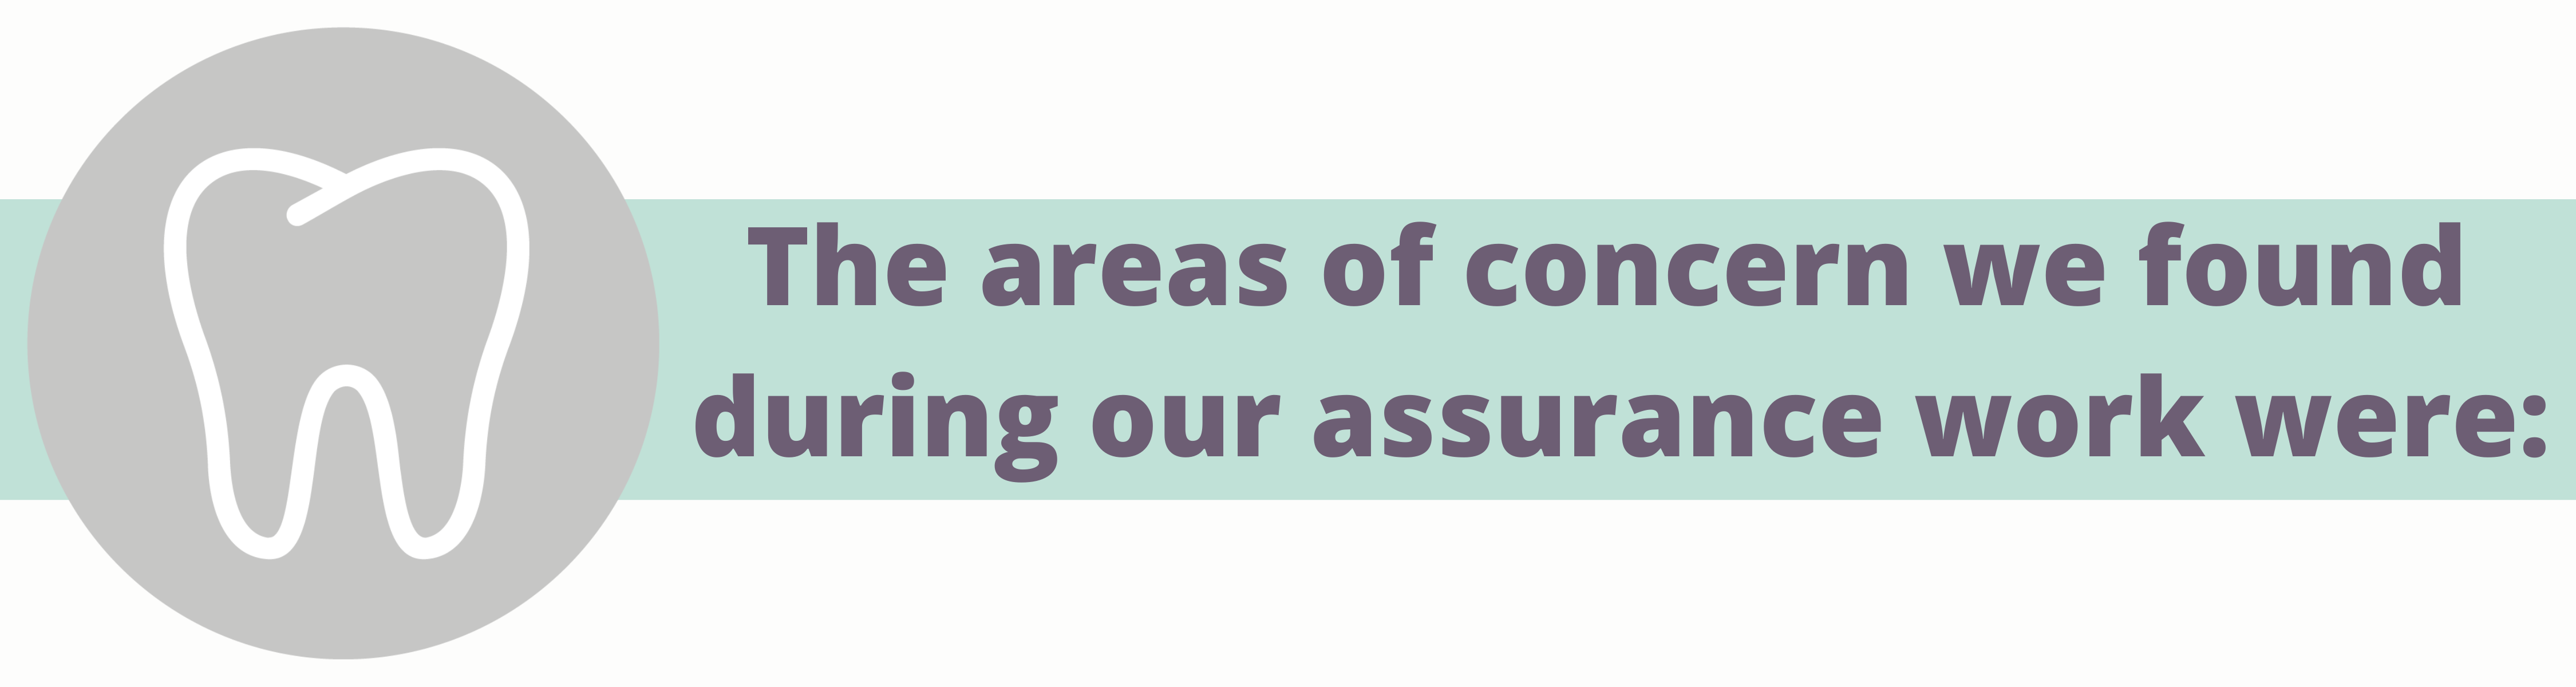 The areas of concern we have found during our assurance work were: